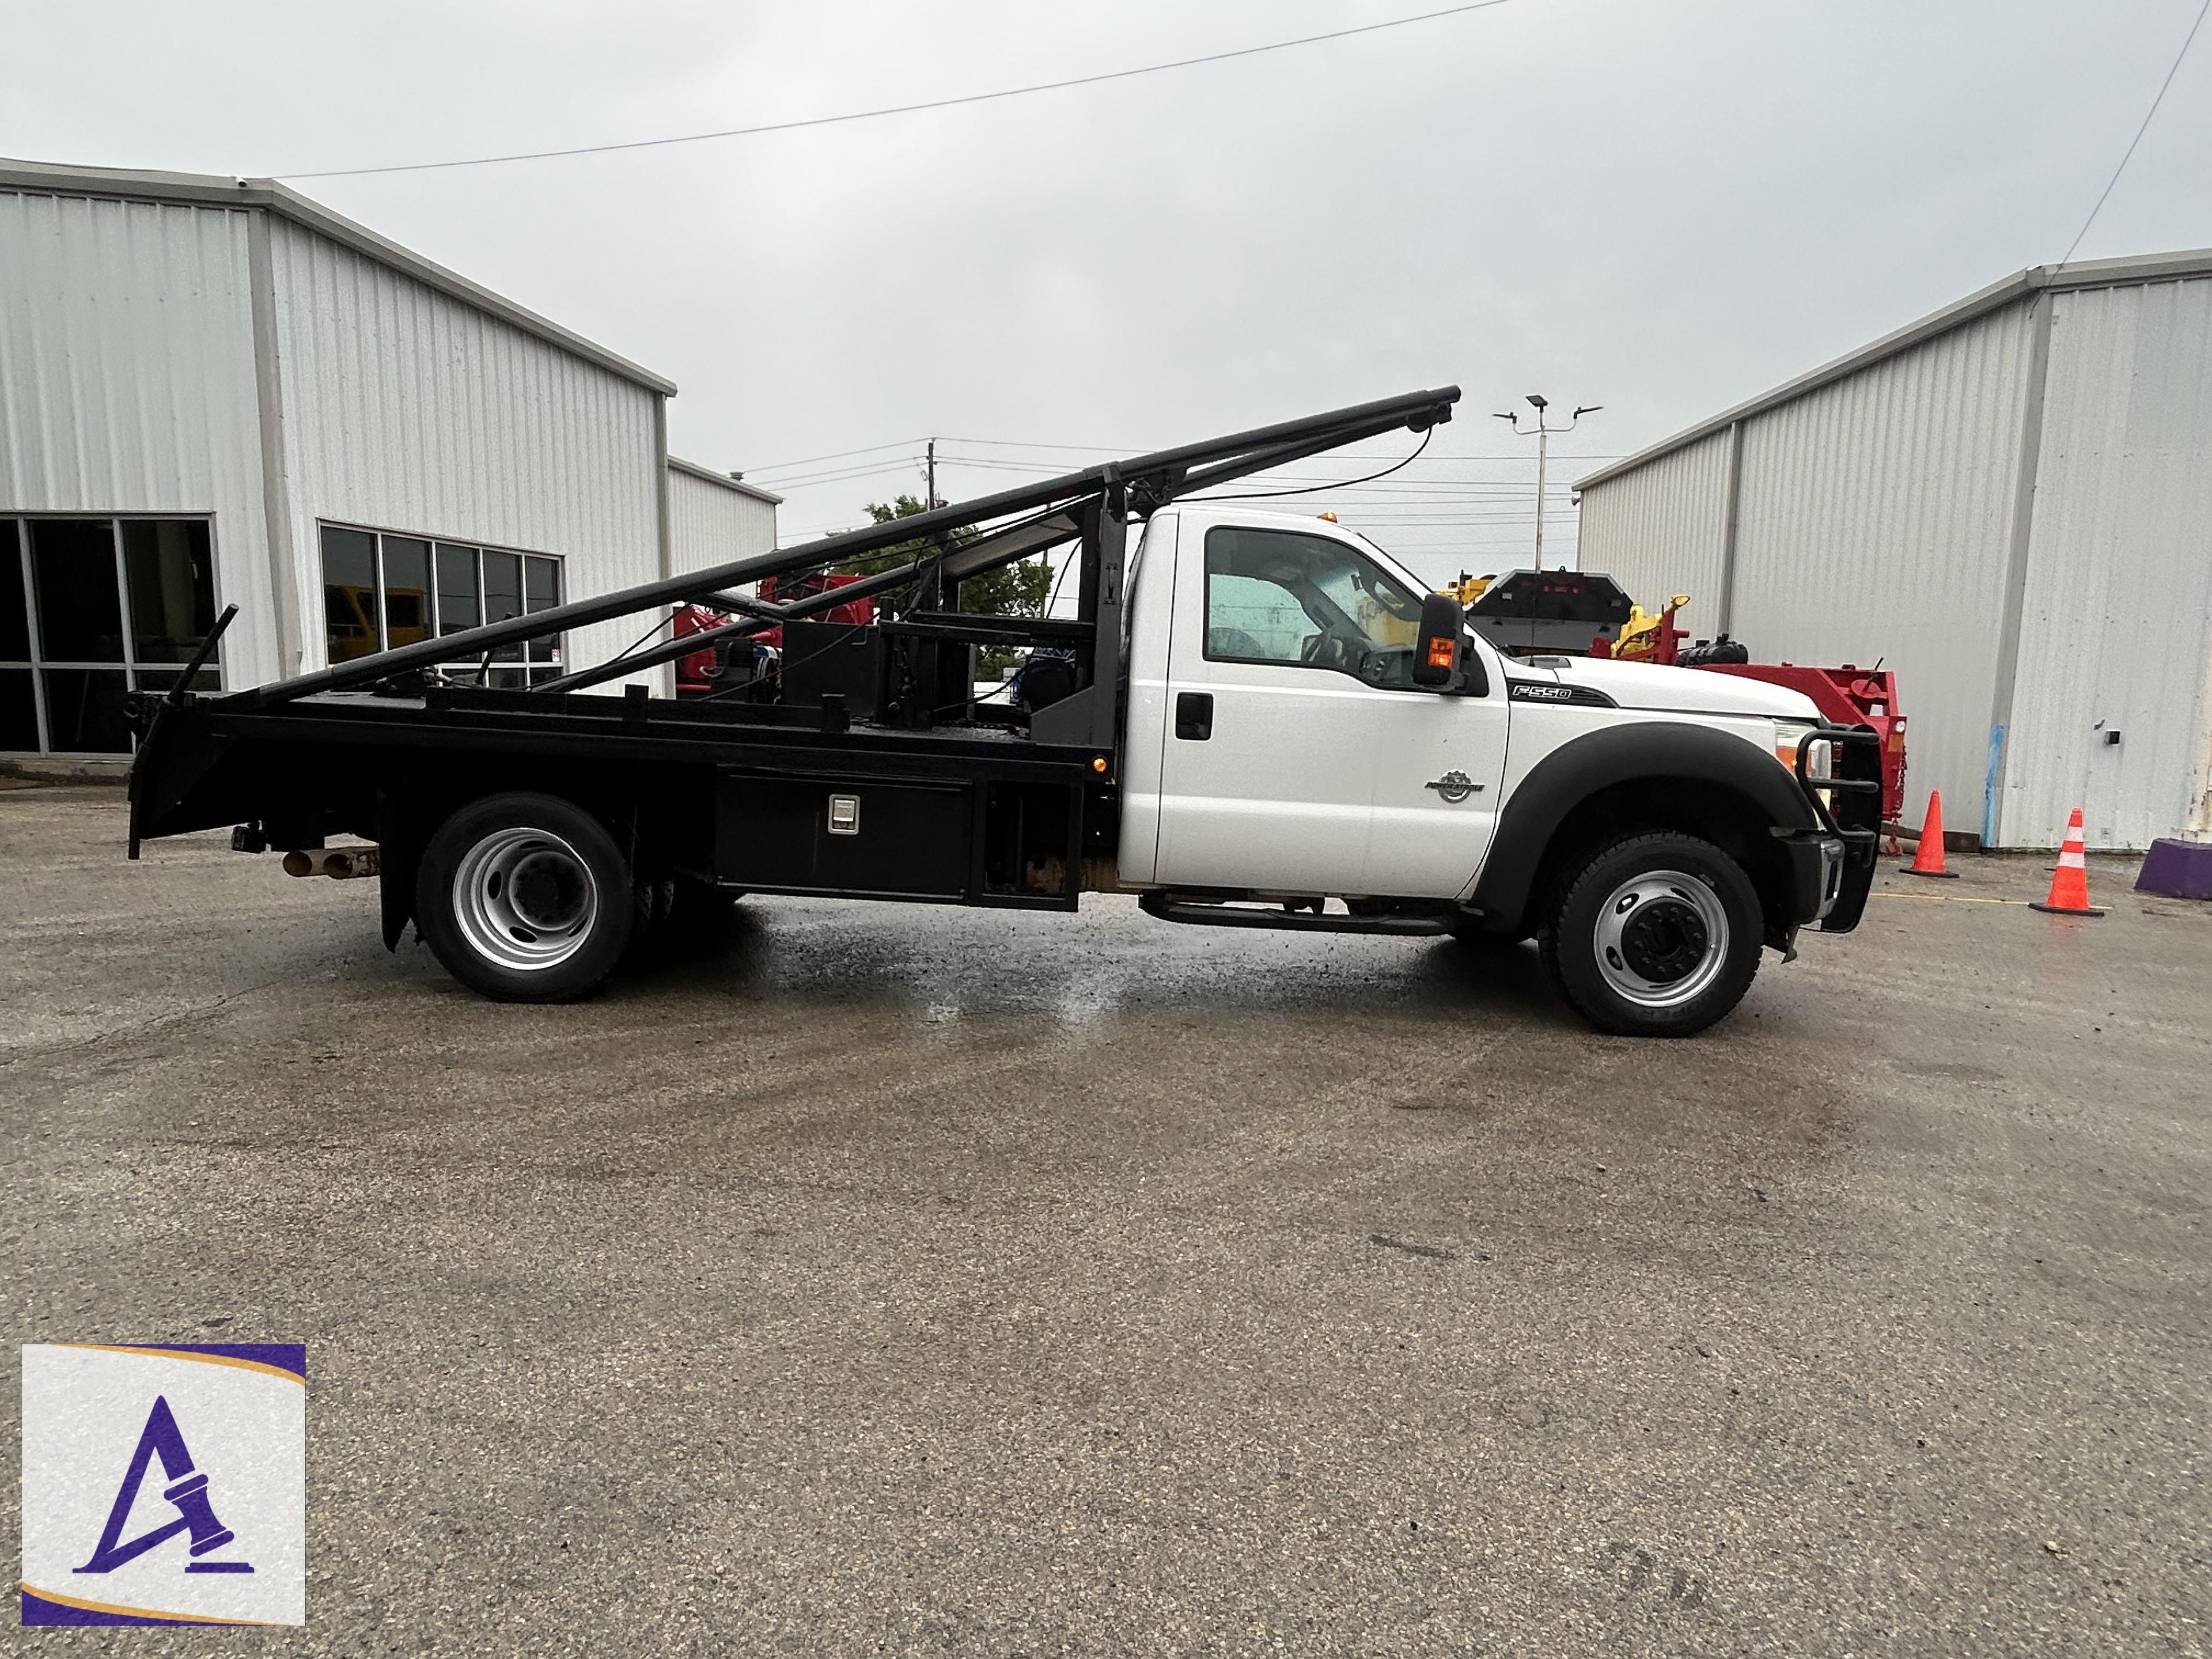 2014 Ford F-550 Roustabout Truck - Powerstroke Diesel - Winch - Air Compressor - 252,776 Miles!